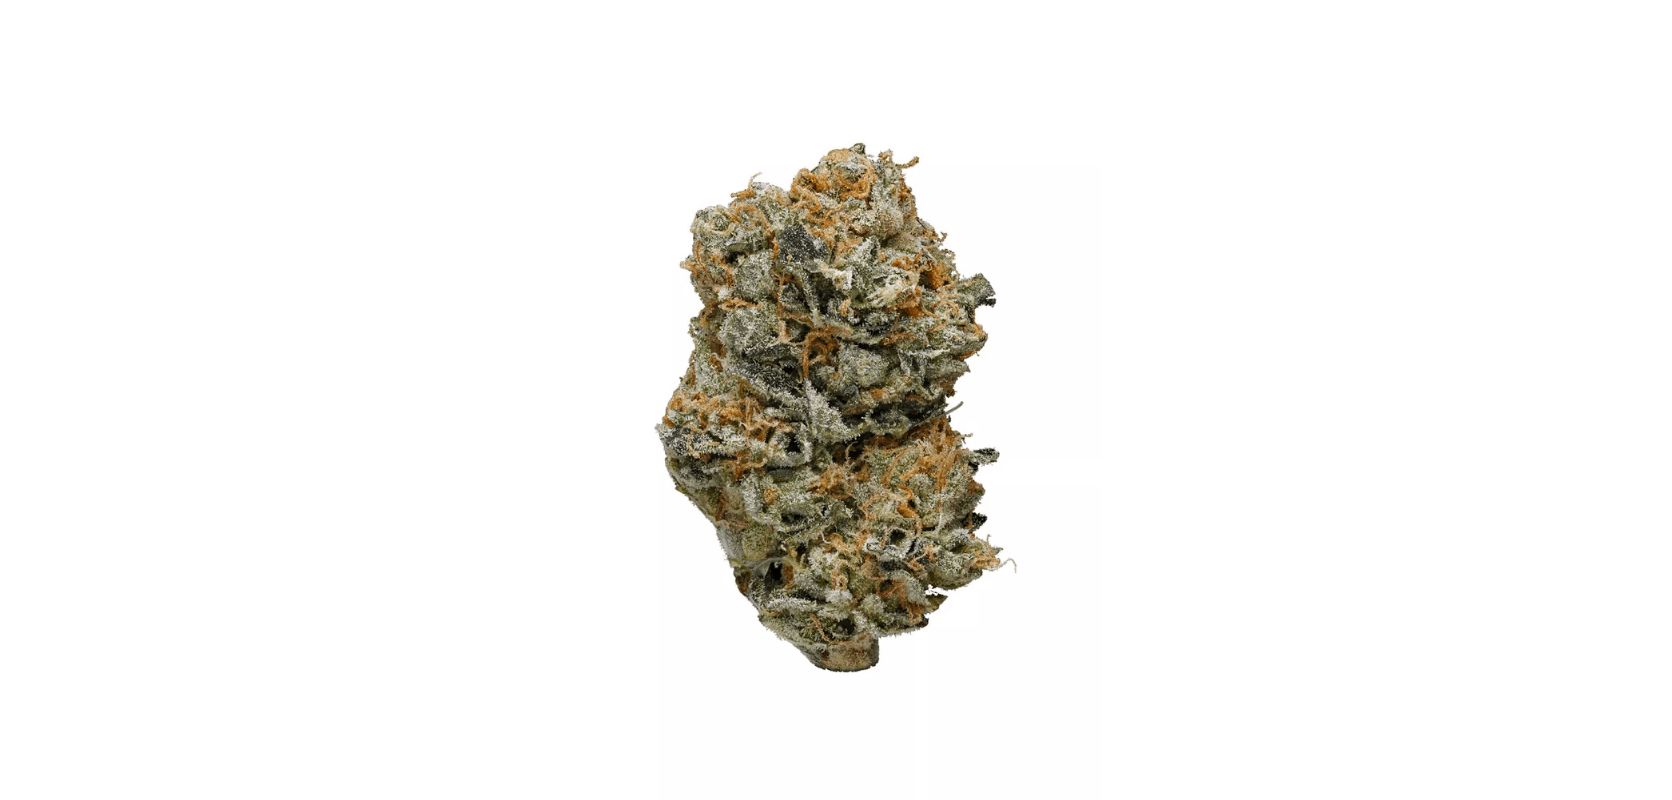 Buy weed online in Canada and find buds like the Blue Cheese strain. Shop at an online dispensary and get your hands on the finest and most potent Indicas such as the Blue Cheese weed.